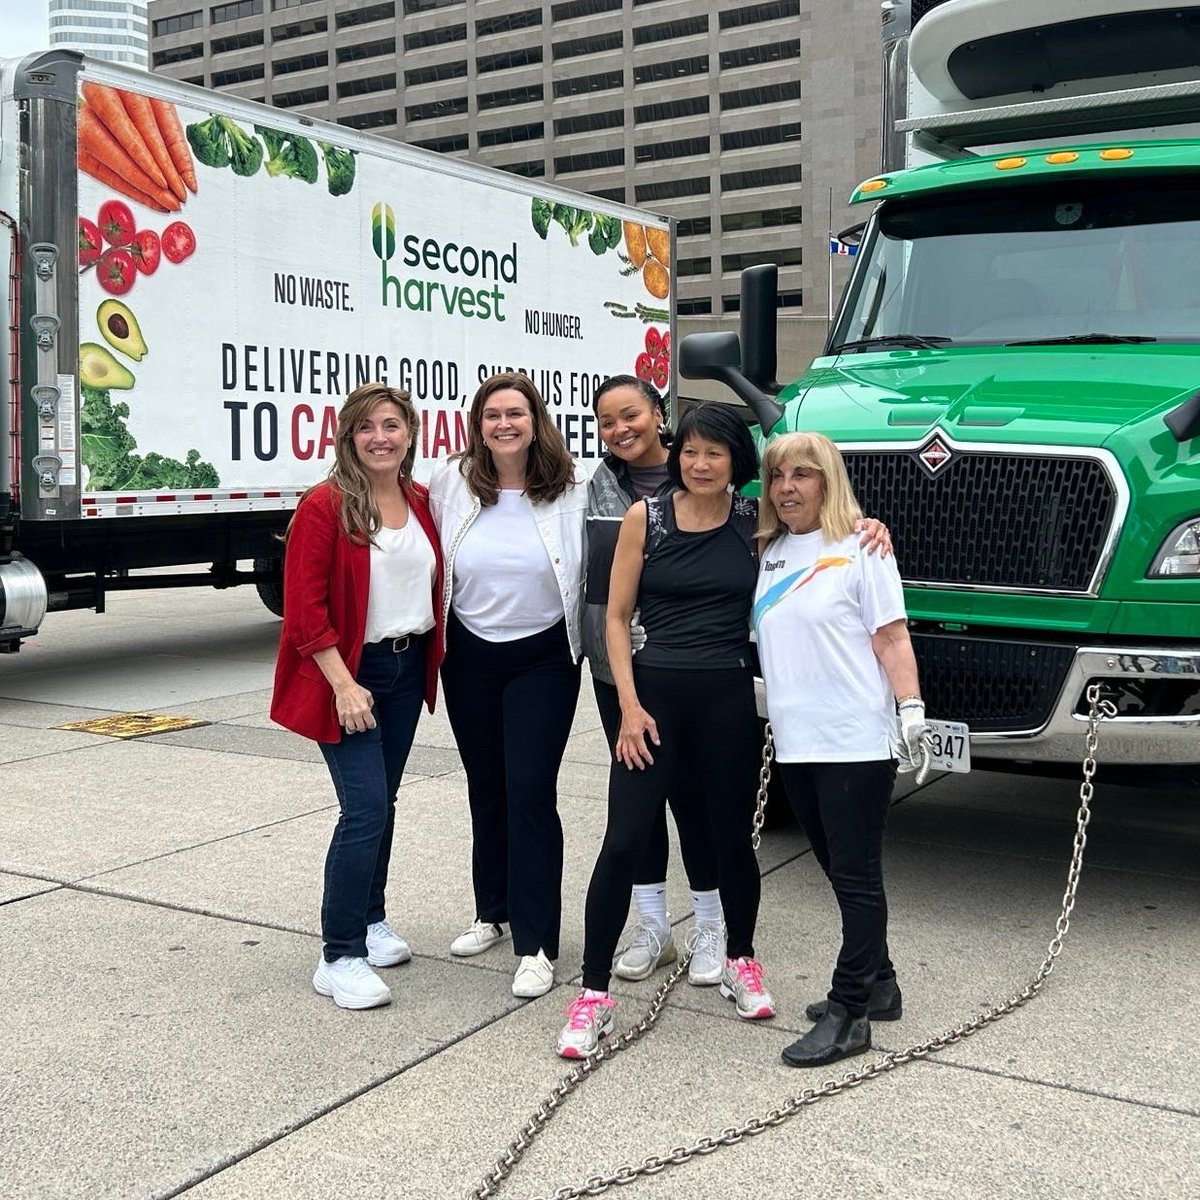 .@SecondHarvestCA Truck Pull! 💪🚚 Team City Hall joined in over lunch. Thank you so much to @CllrAmberMorley, @McKelvieTO and @FrancesNunziata for helping to get the truck over the finish line for a good cause. Great team work!